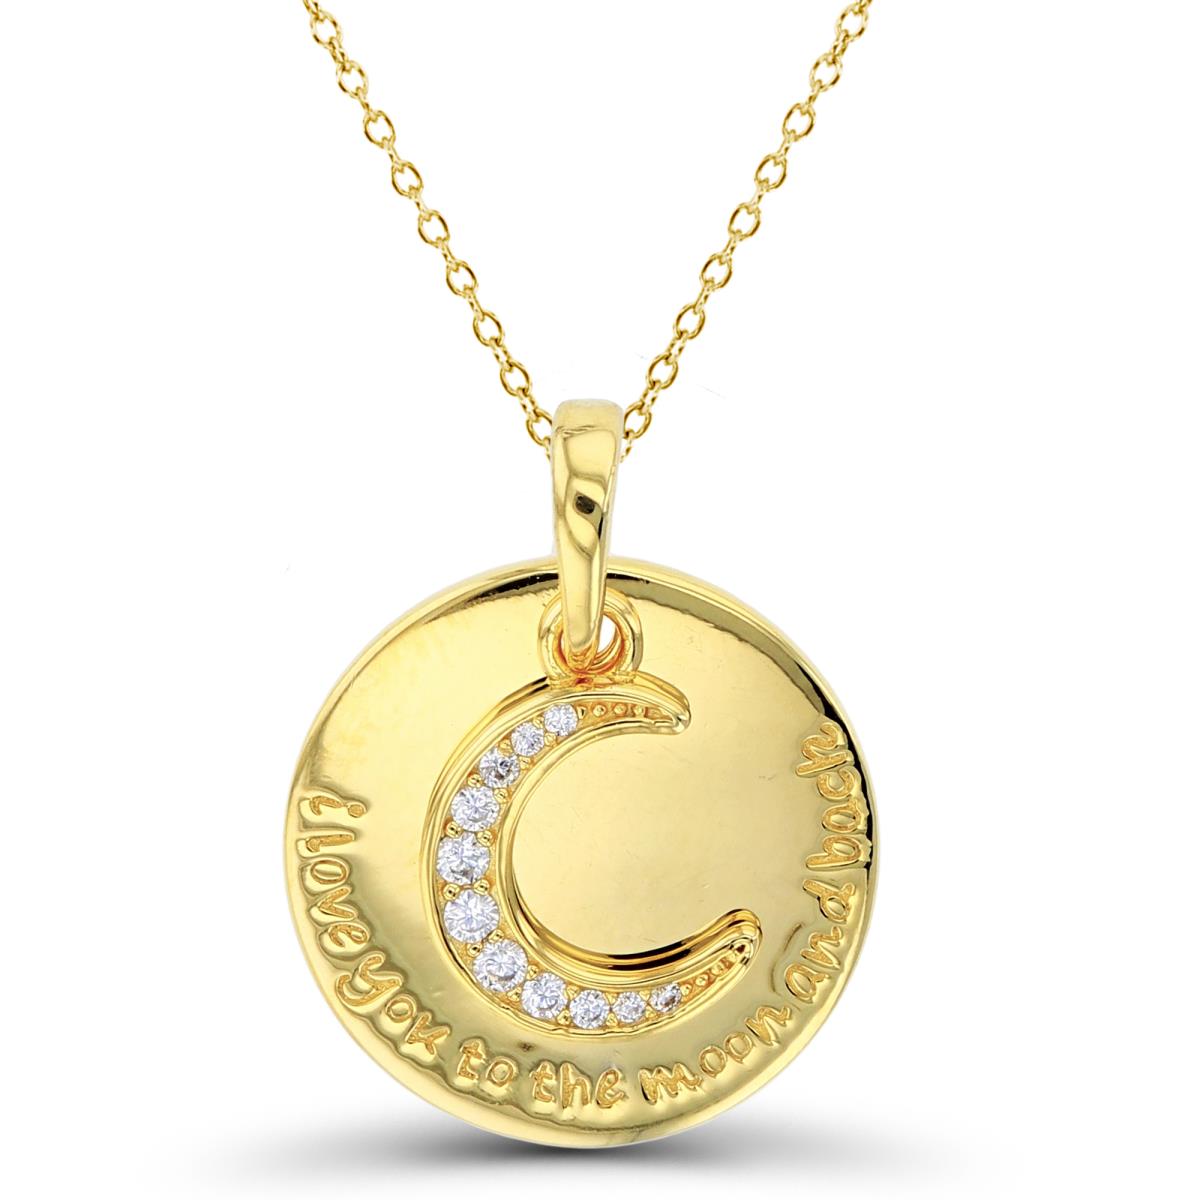 Sterling Silver+1Micron Yellow Gold Rnd White CZ Moon &"I Love You To The Moon"High Polish Engraved Circle 18"Necklace